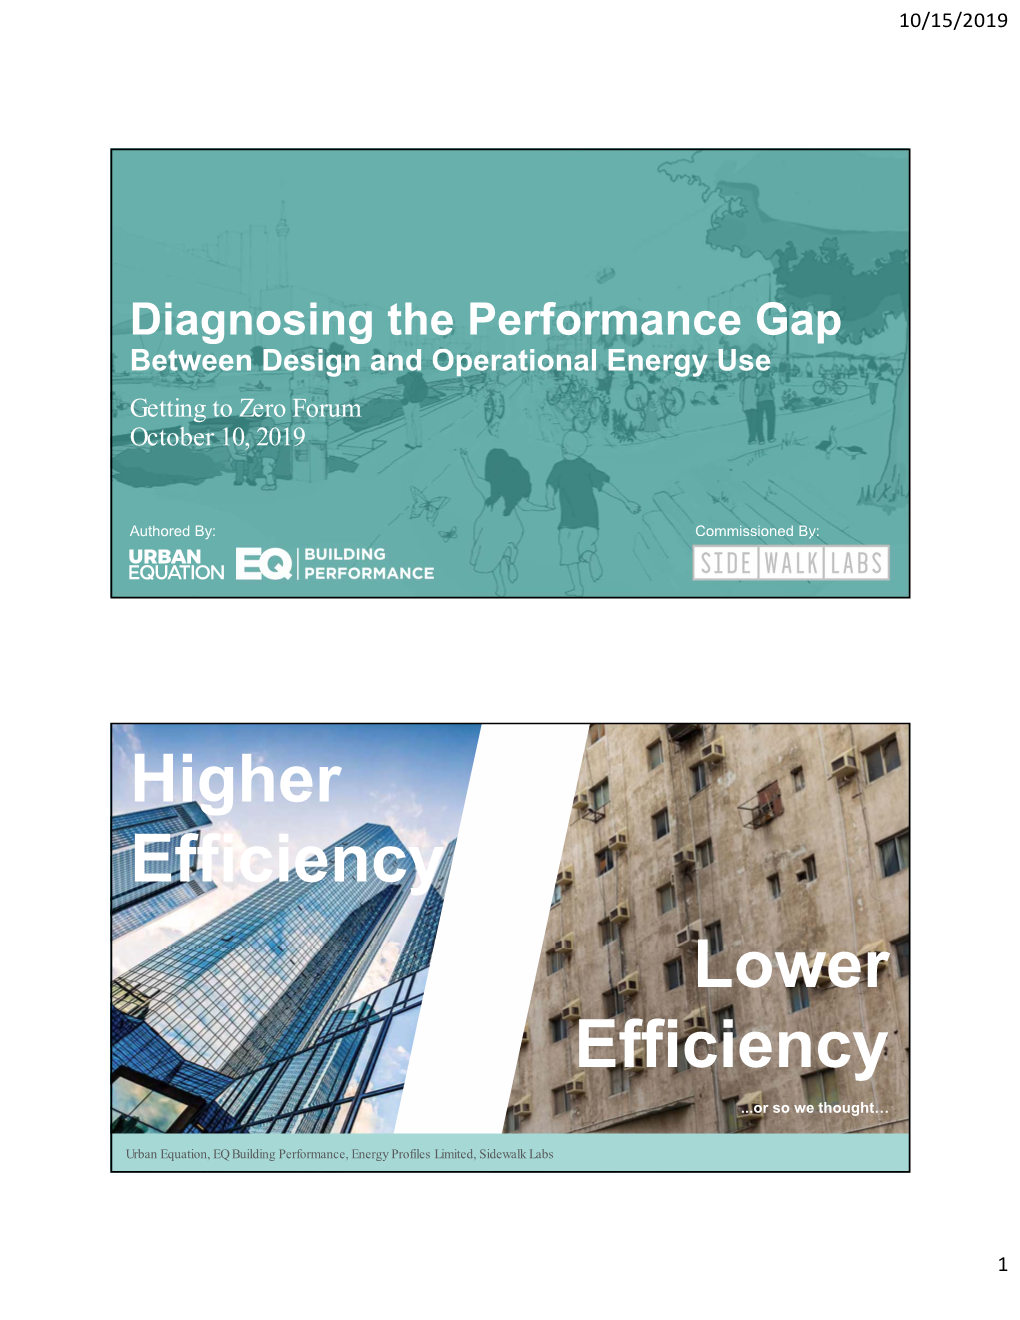 Performance Gap Between Design and Operational Energy Use Getting to Zero Forum October 10, 2019